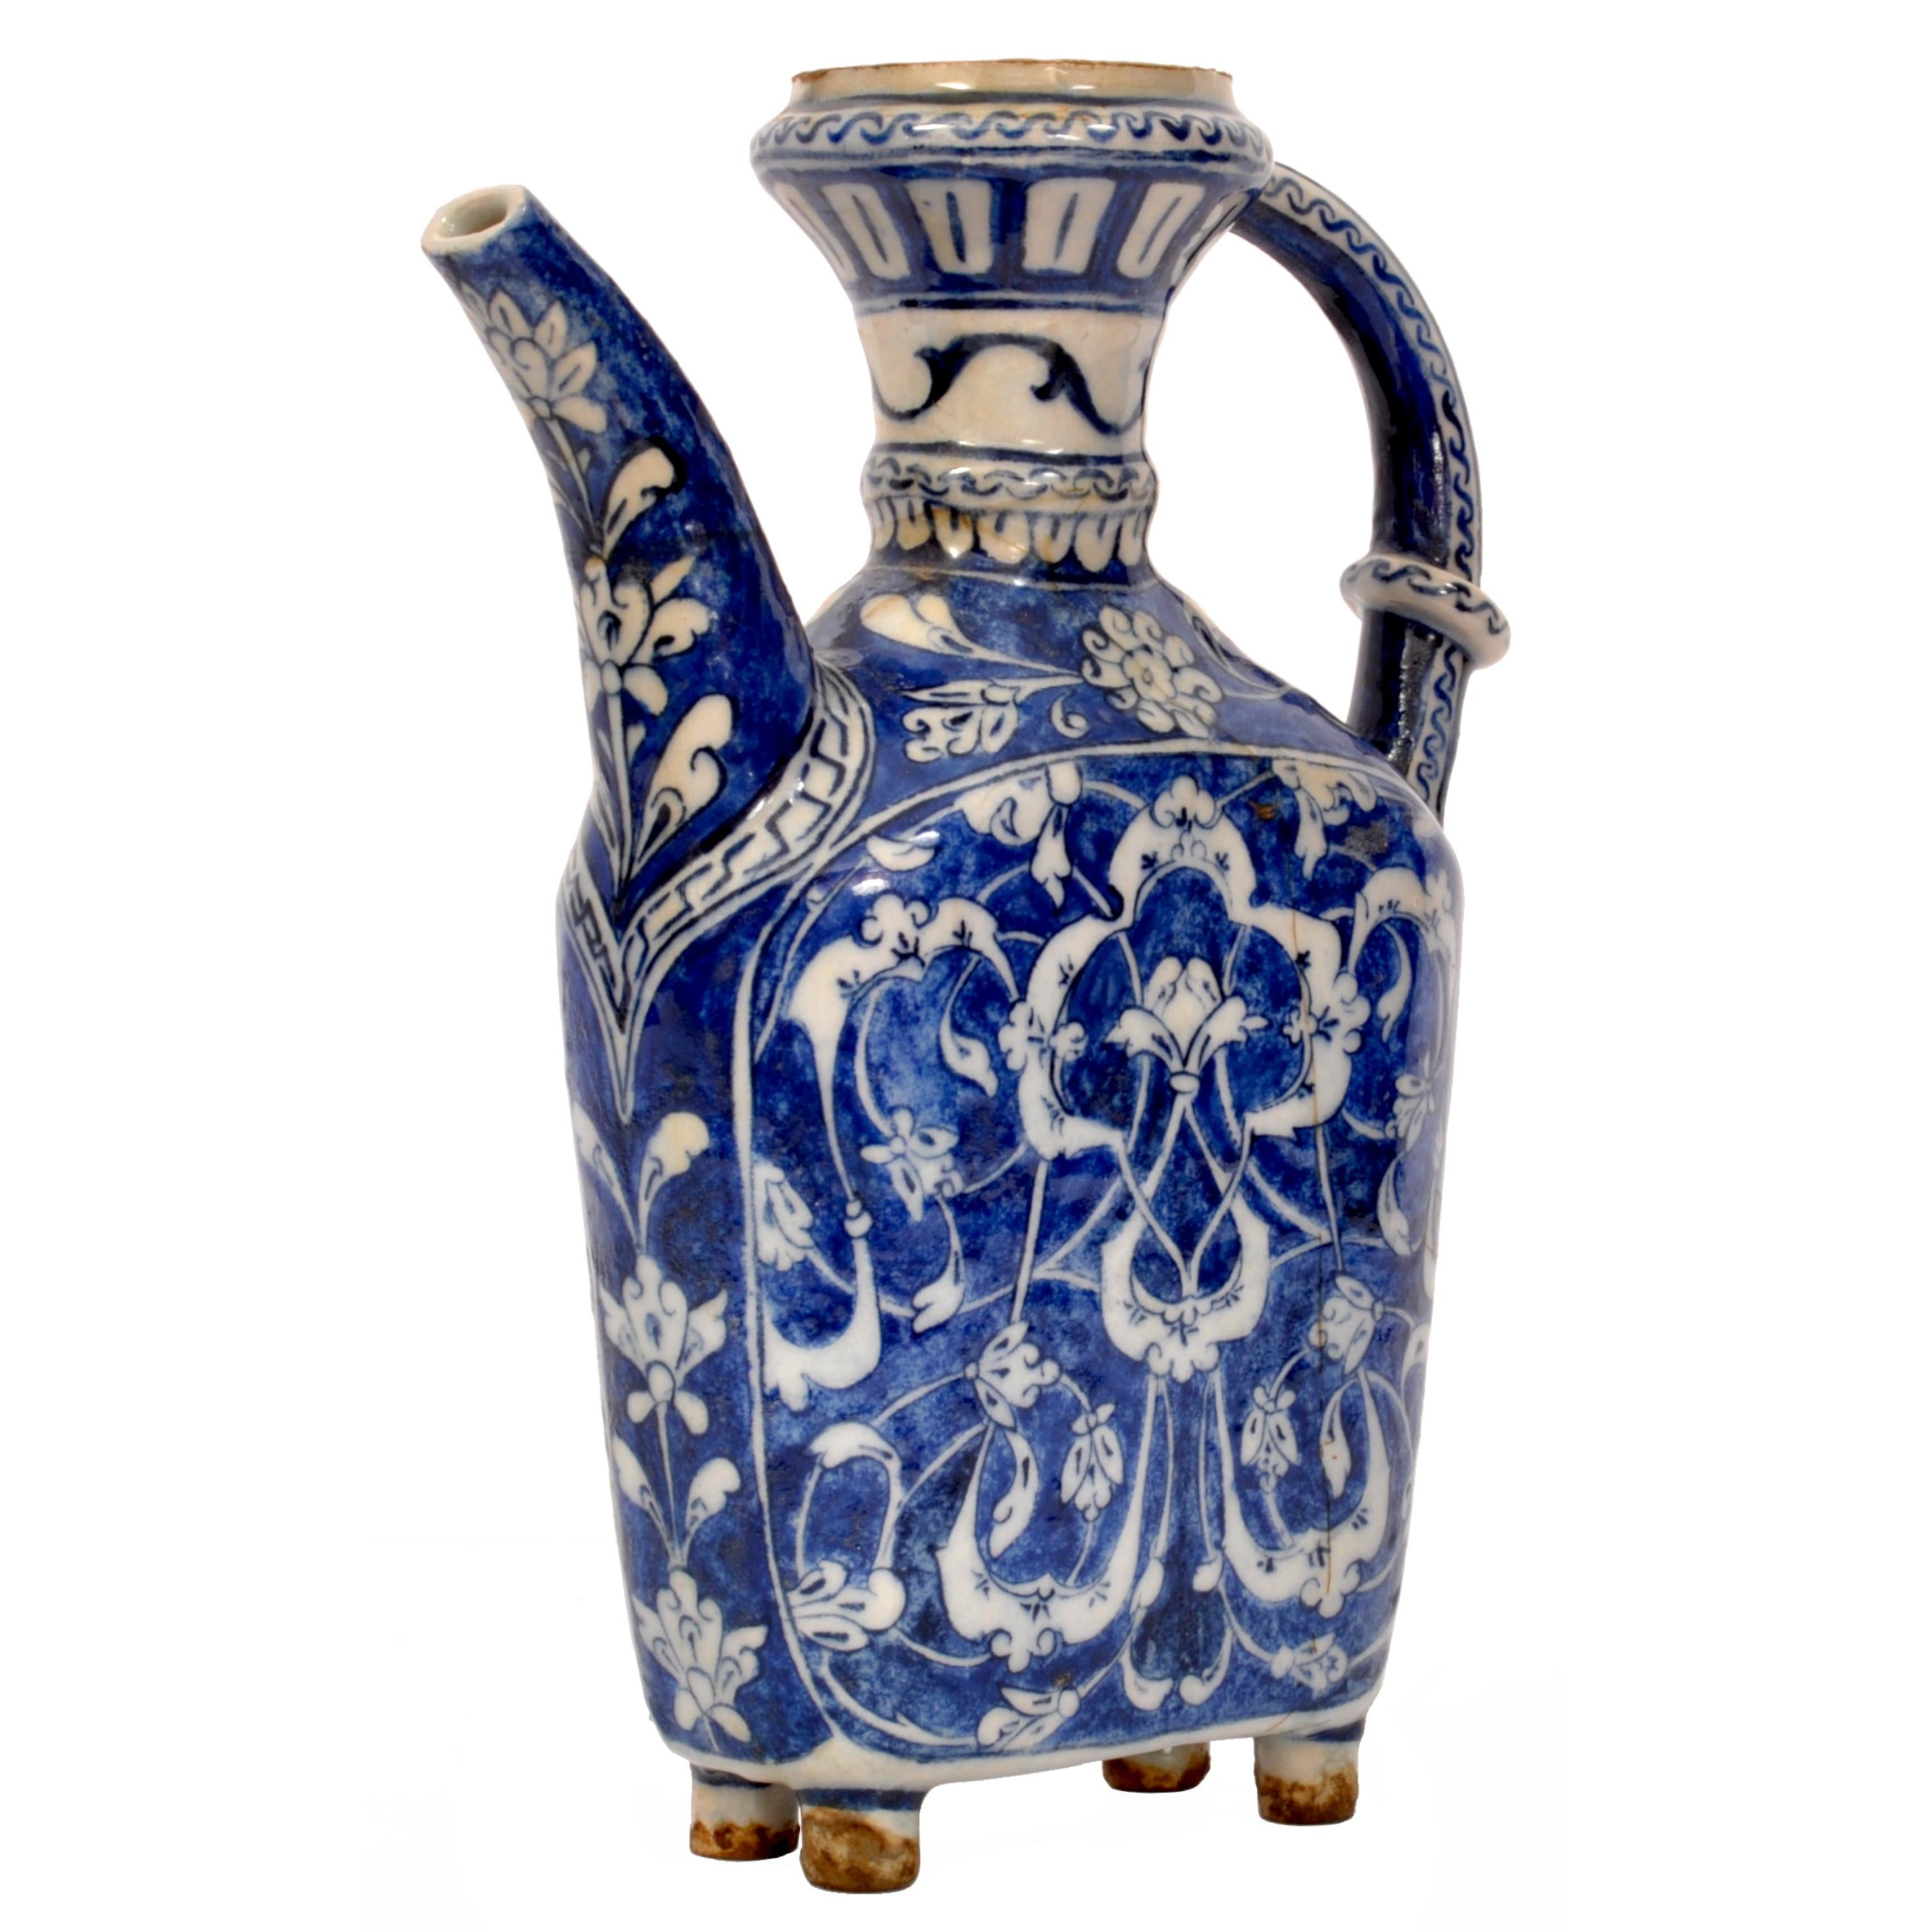 A good antique blue and white Iznik pottery spouted water jug, circa 1650.
An unusual Iznik ewer of compressed form, having a flared neck, connected to the compressed body of the ewer with an arched handle. The jug having a gently arched pouring